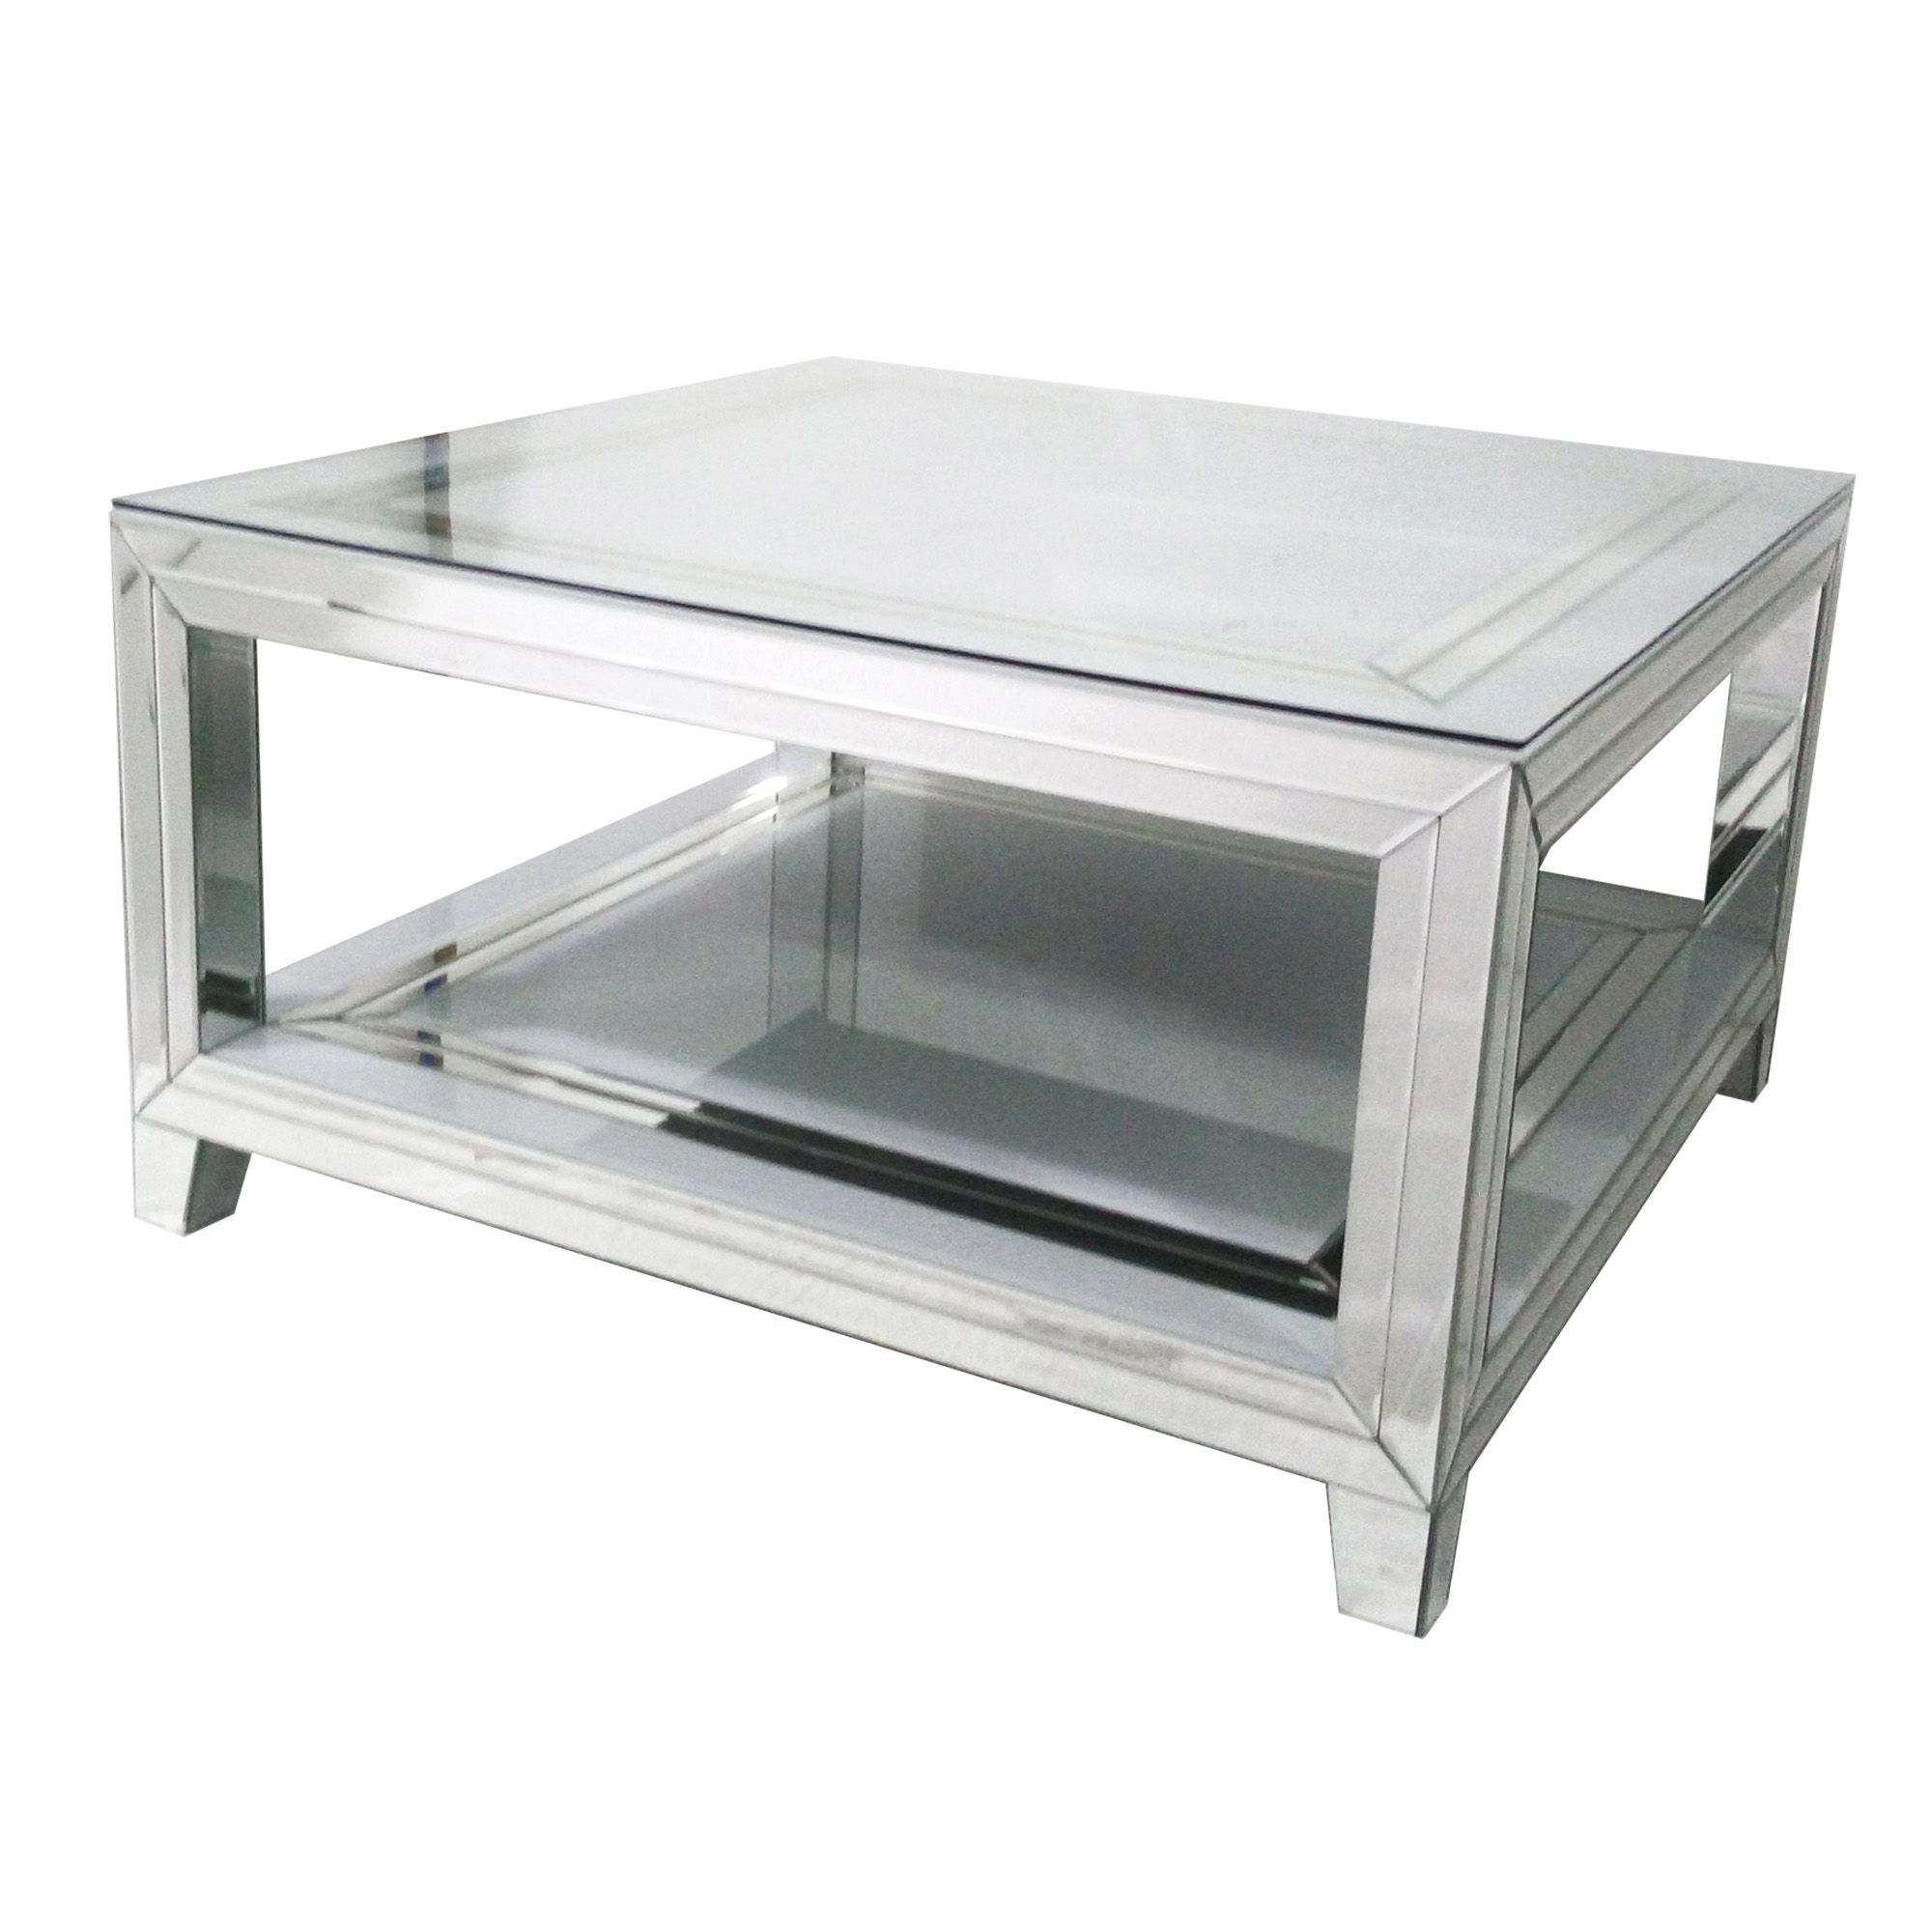 Mirrored Furniture For Widely Used Mirrored Modern Coffee Tables (View 12 of 20)